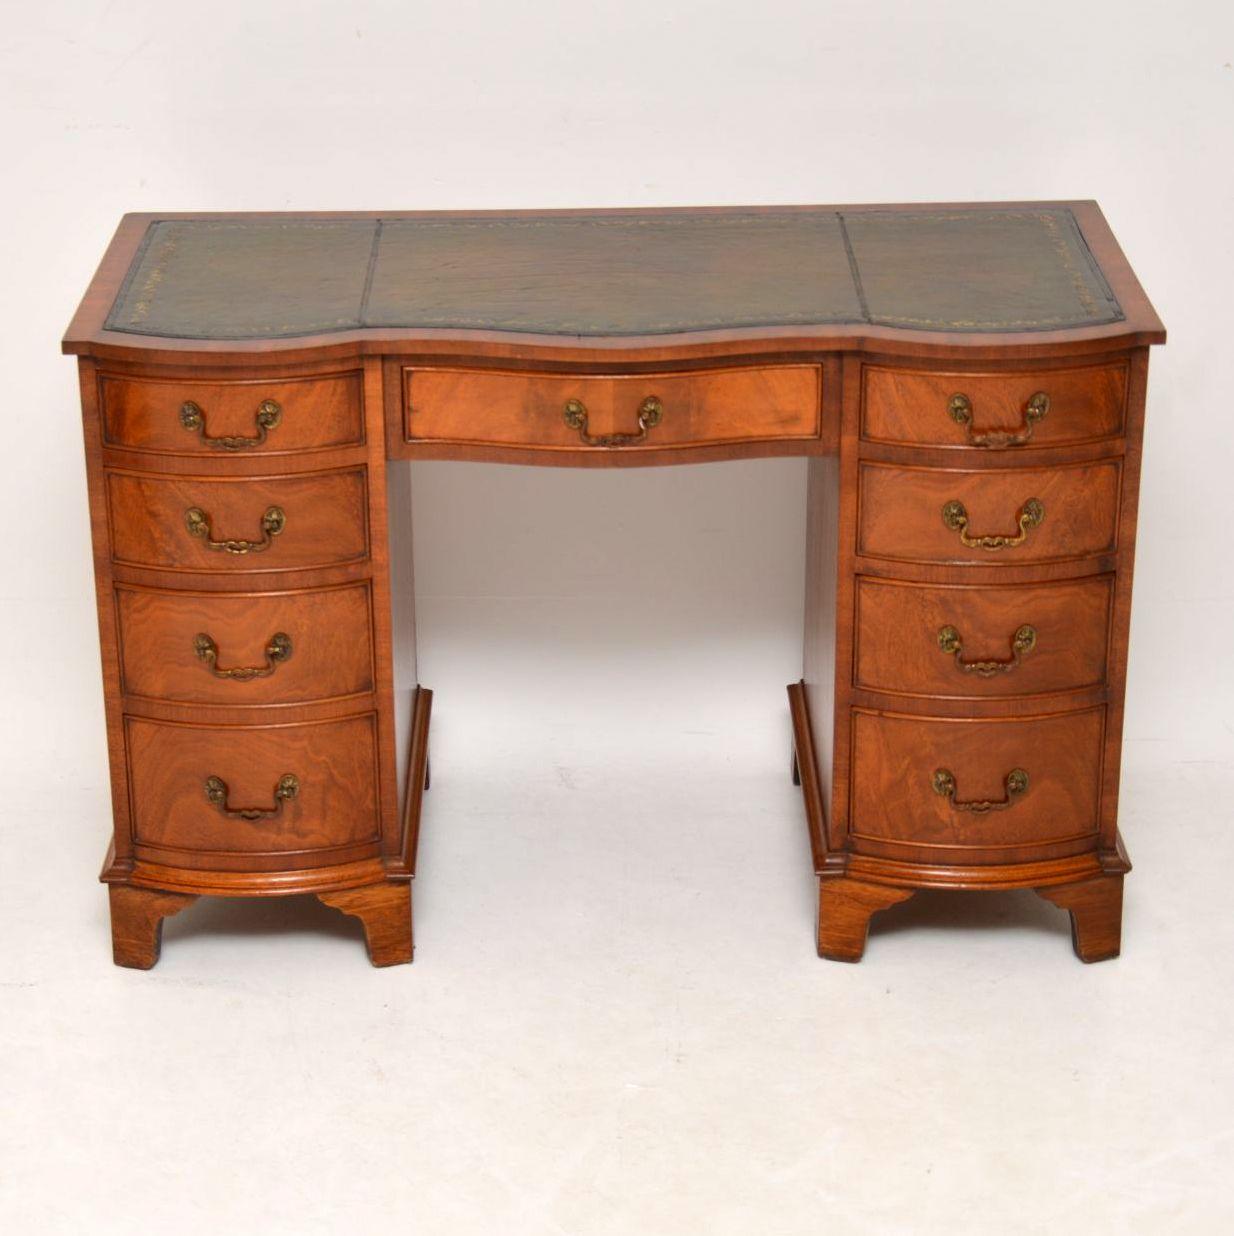 Antique Regency style flame mahogany pedestal desk with a tooled leather writing surface and in excellent condition. It has a double serpentine shaped front and drawers of graduated depth with beautifully cast brass handles. This desk sits on